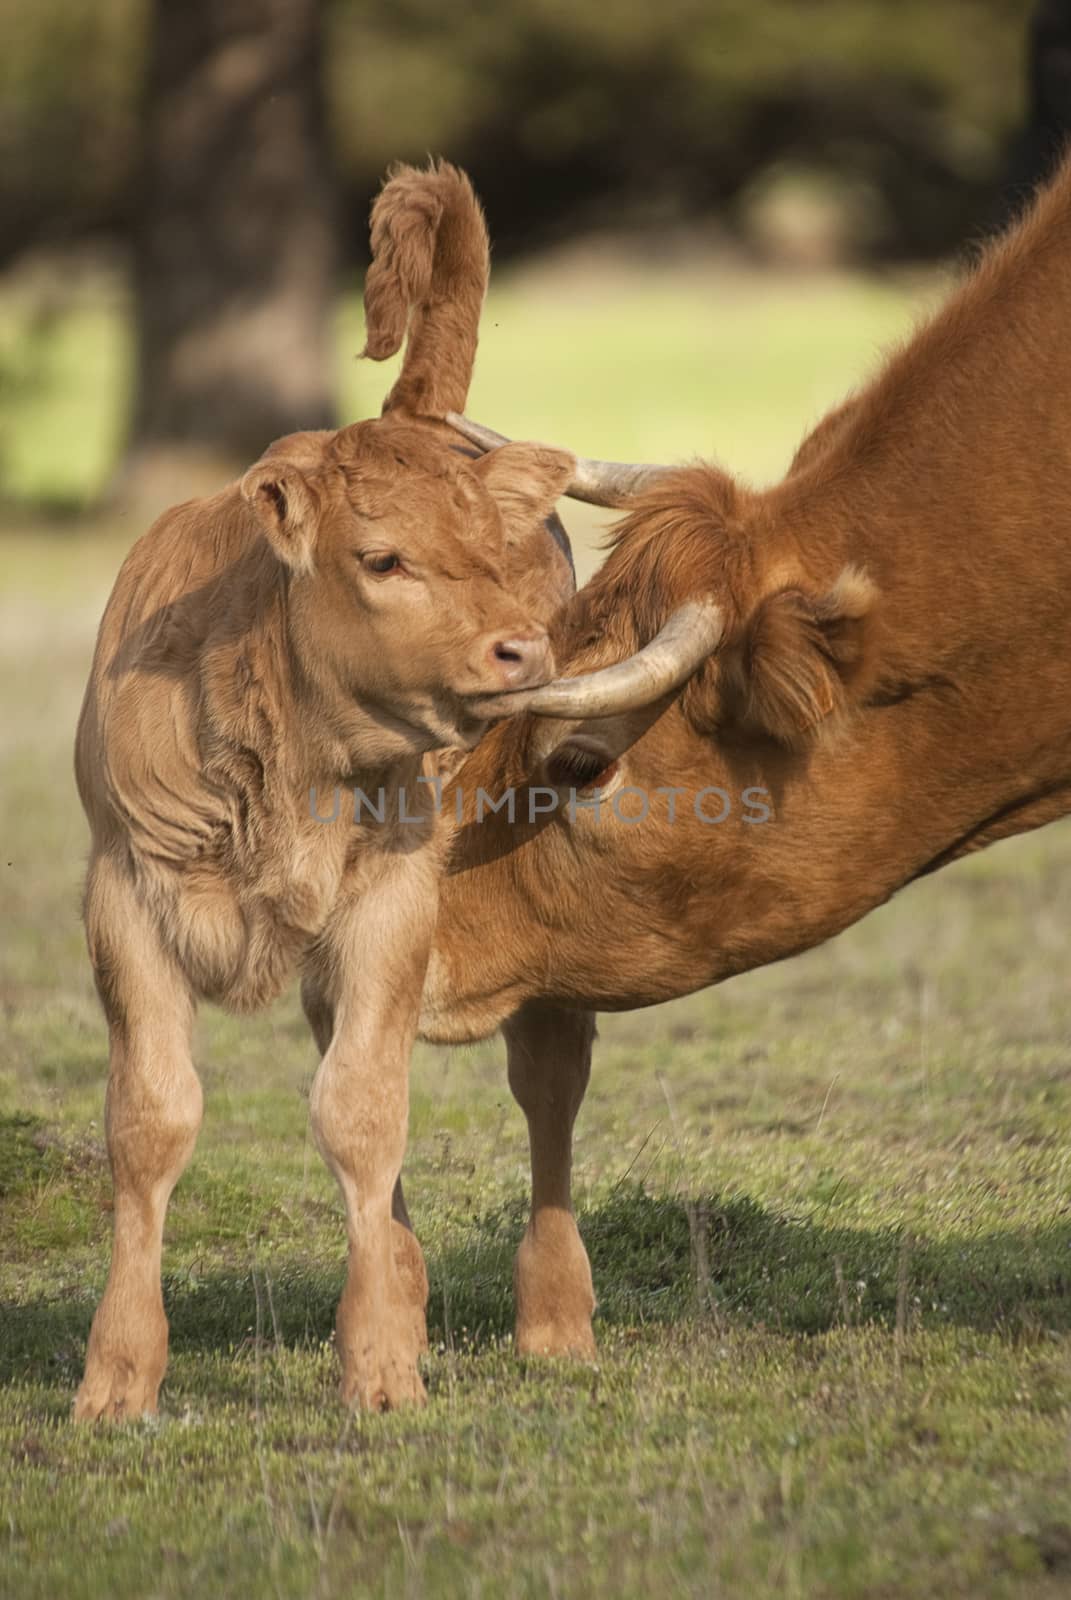 A newborn calf and his mother a cow